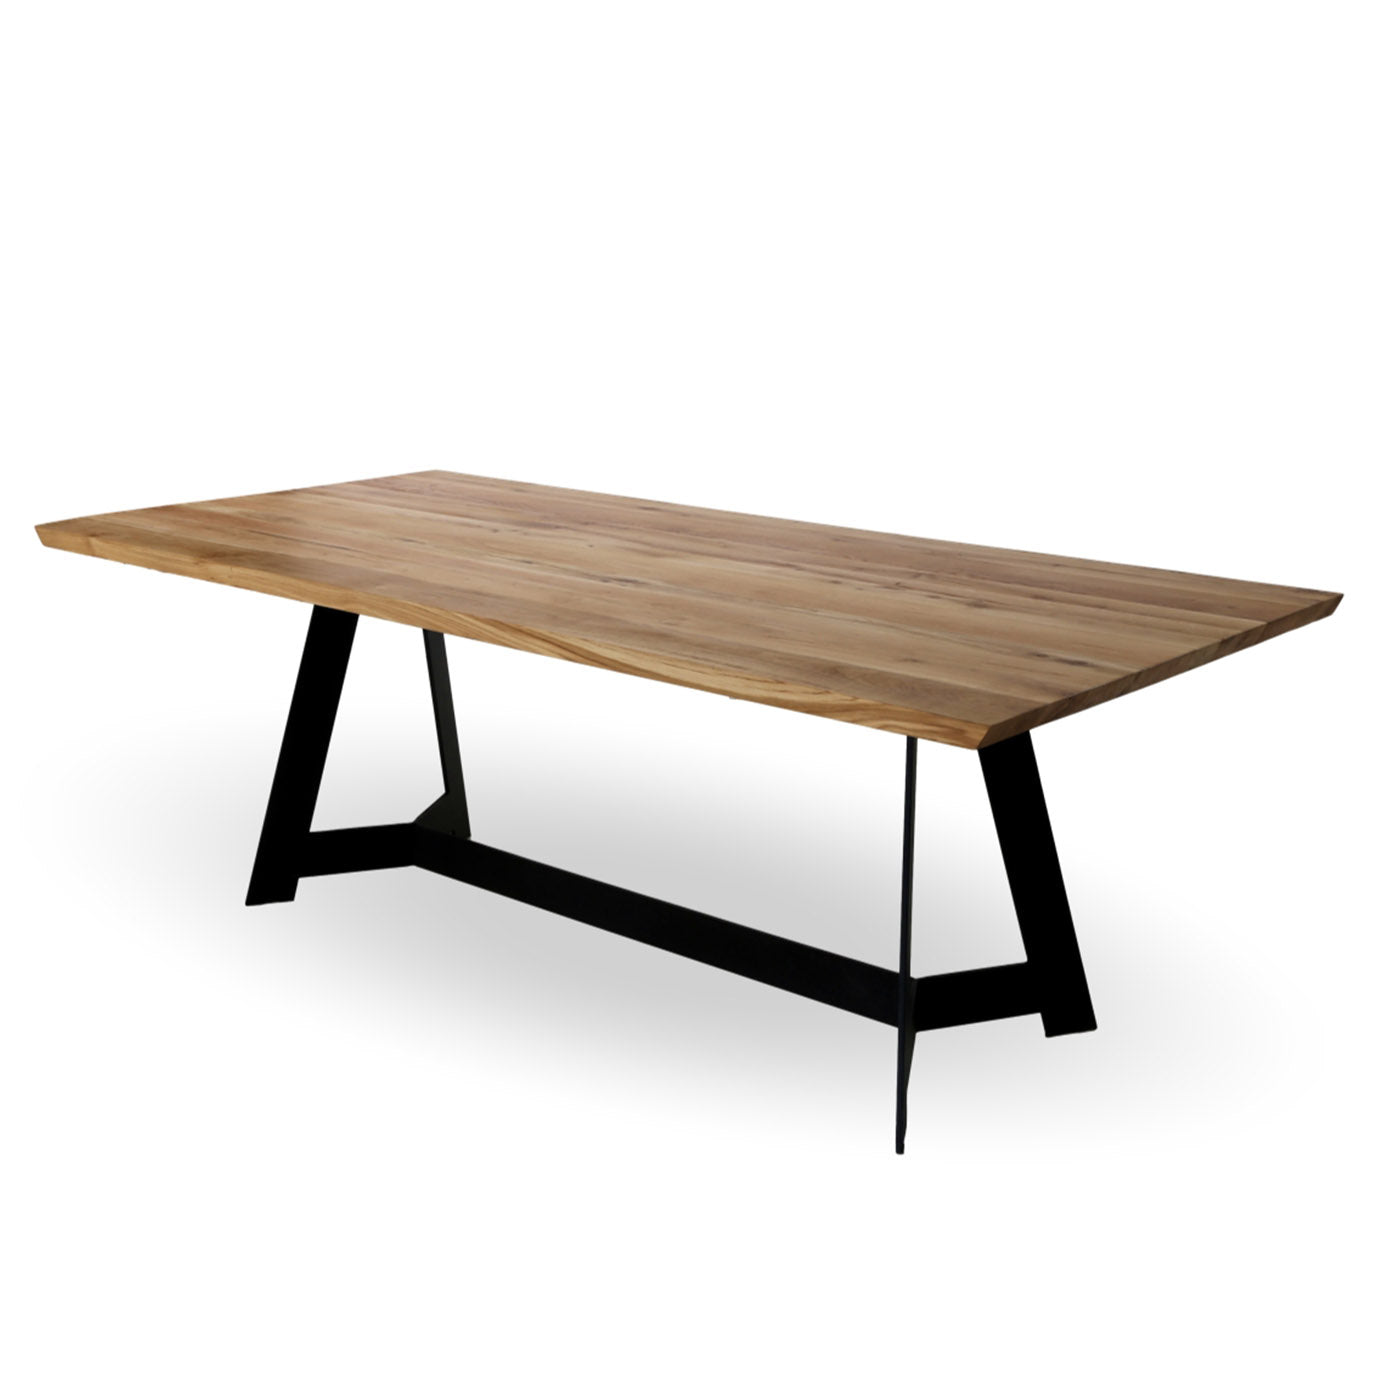 Durmast and Metal Rectangular Dining Table - Alternative view 1